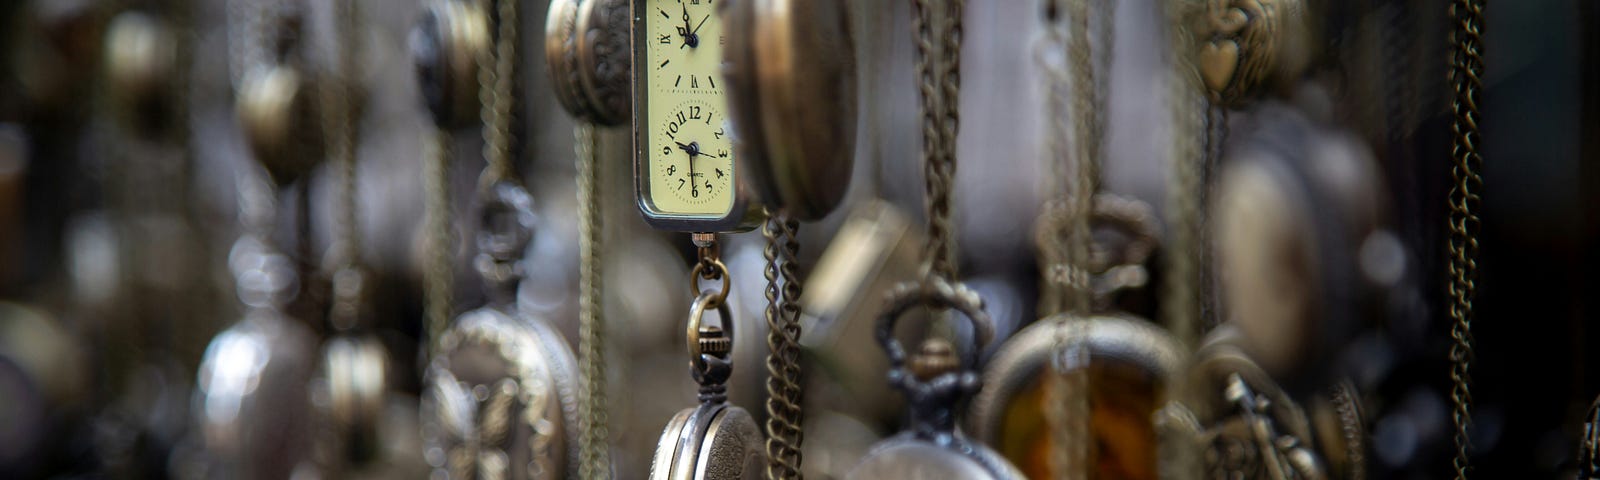 A photo of many antique pocket watches hanging on their chains. Photo by Alex Guillaume on Unsplash